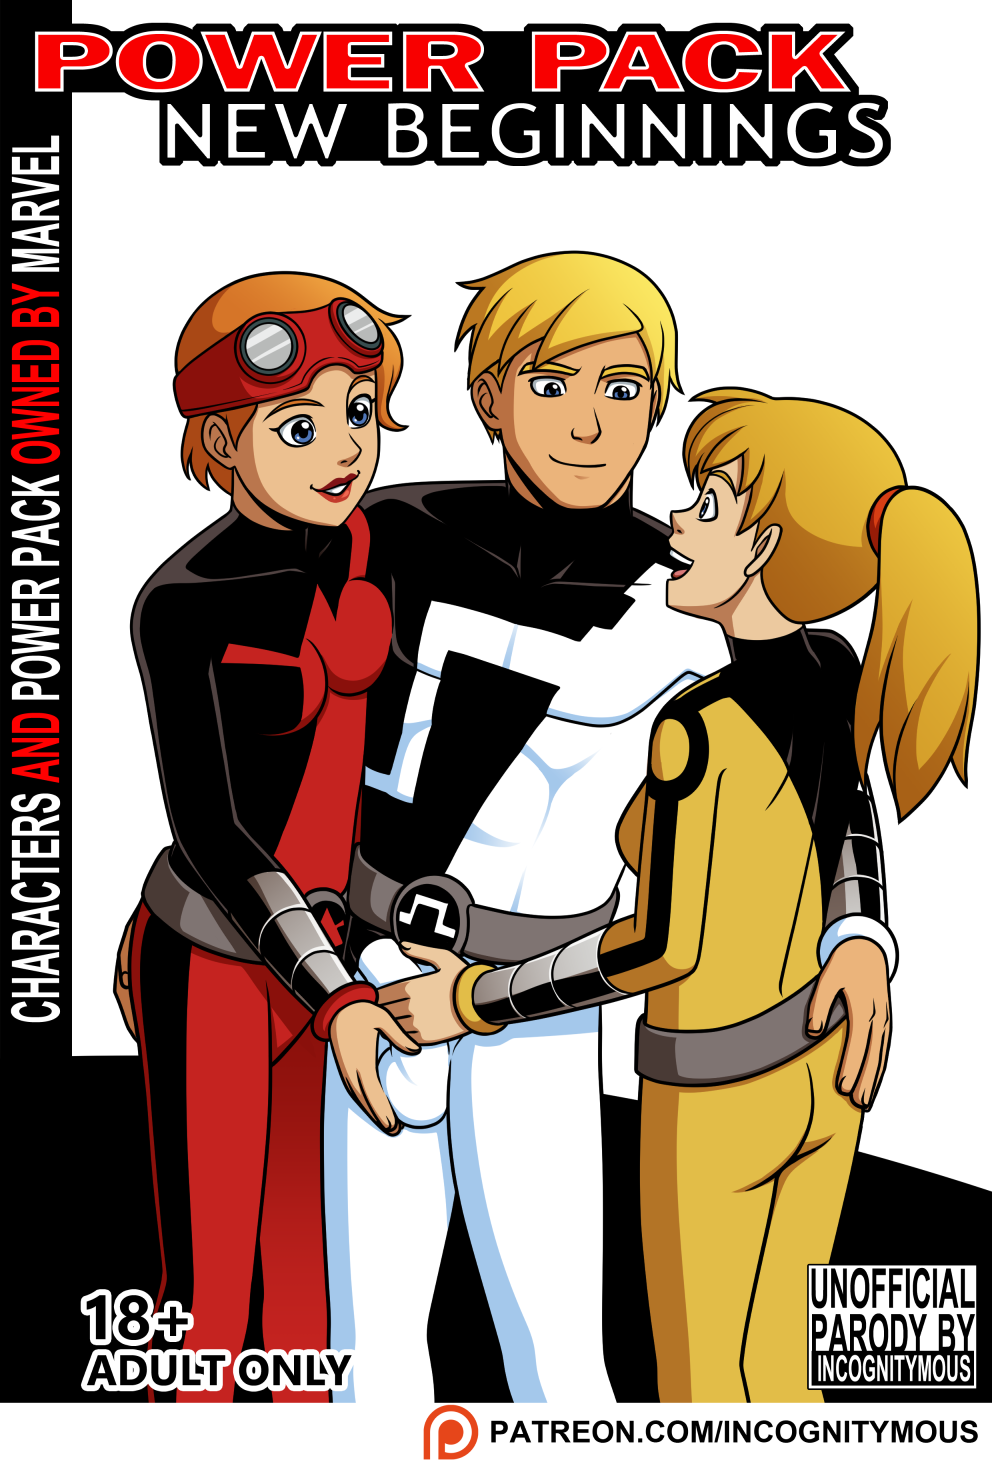 Exclusive comic by Incognitymous - New Beginnings Power Pack - 53 pages